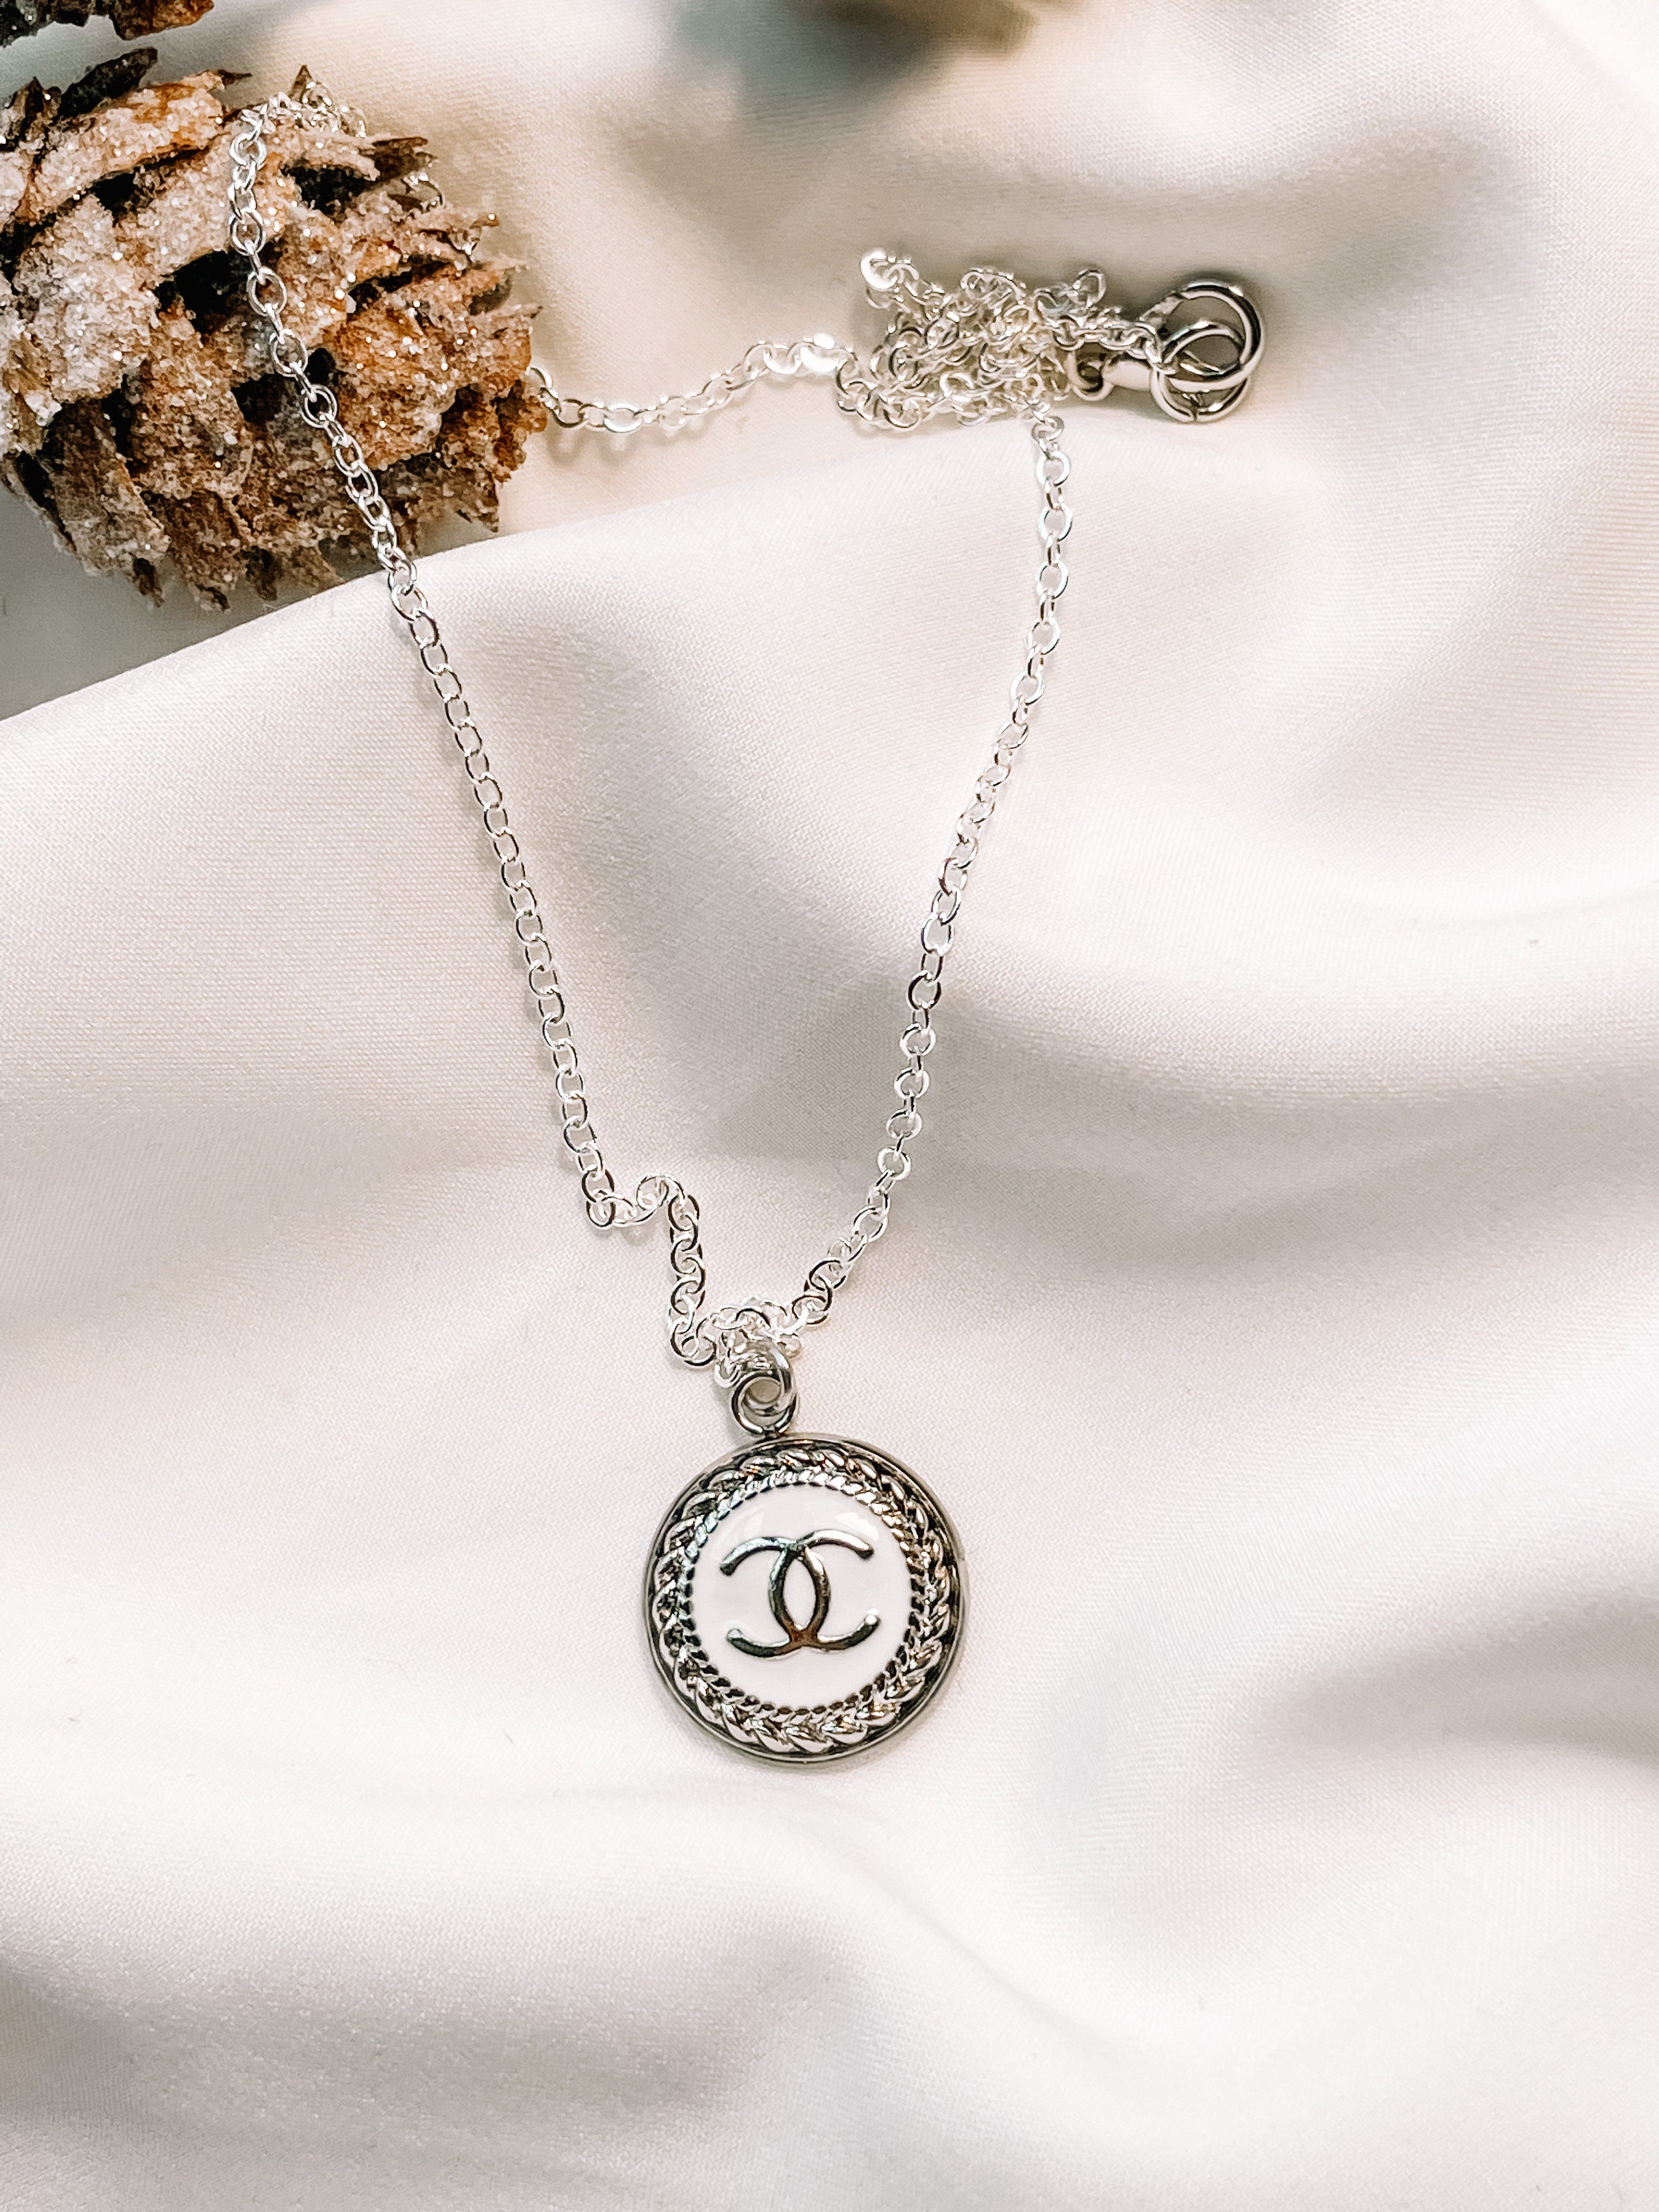 Repurposed Chanel Jewelry Collection – Modern Love Jewelry